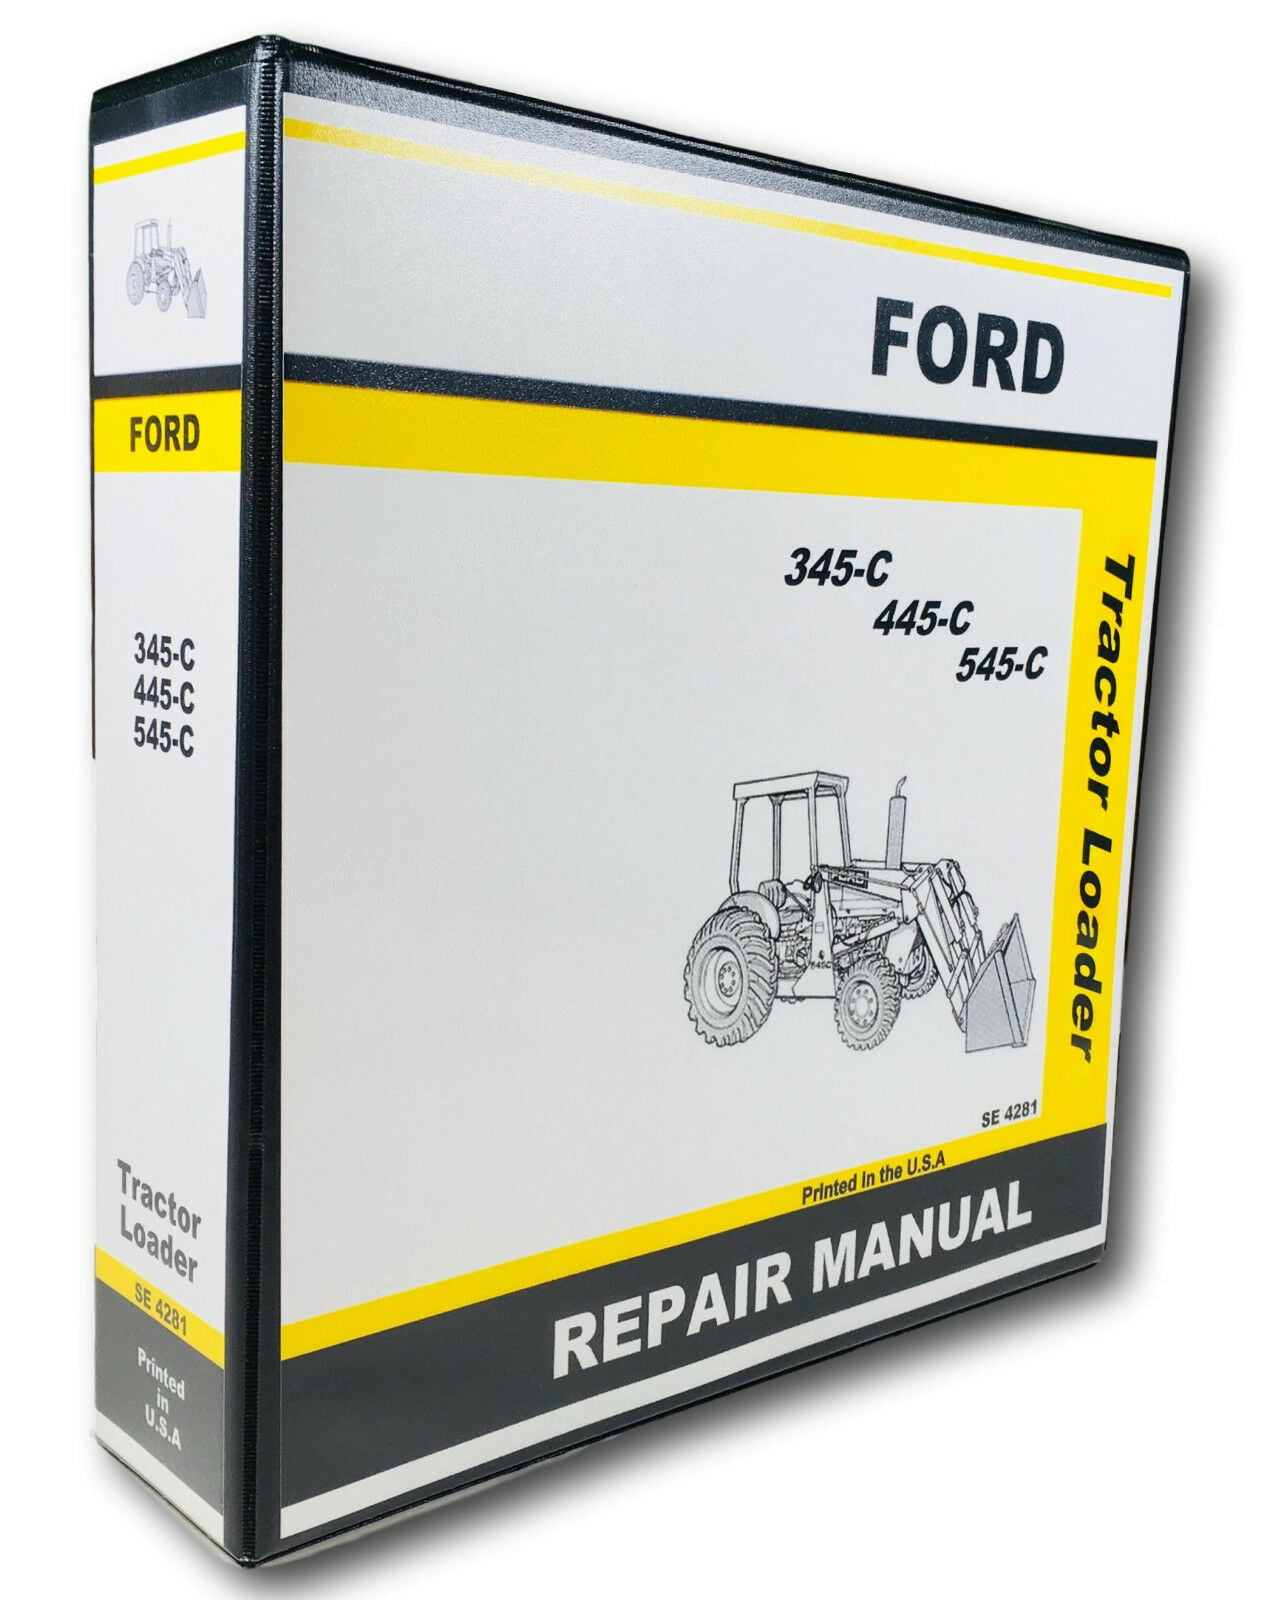 FORD TRACTOR ELECTRICAL DIAGNOSIS SERVICE REPAIR MANUAL TECHNICAL SHOP BOOK 